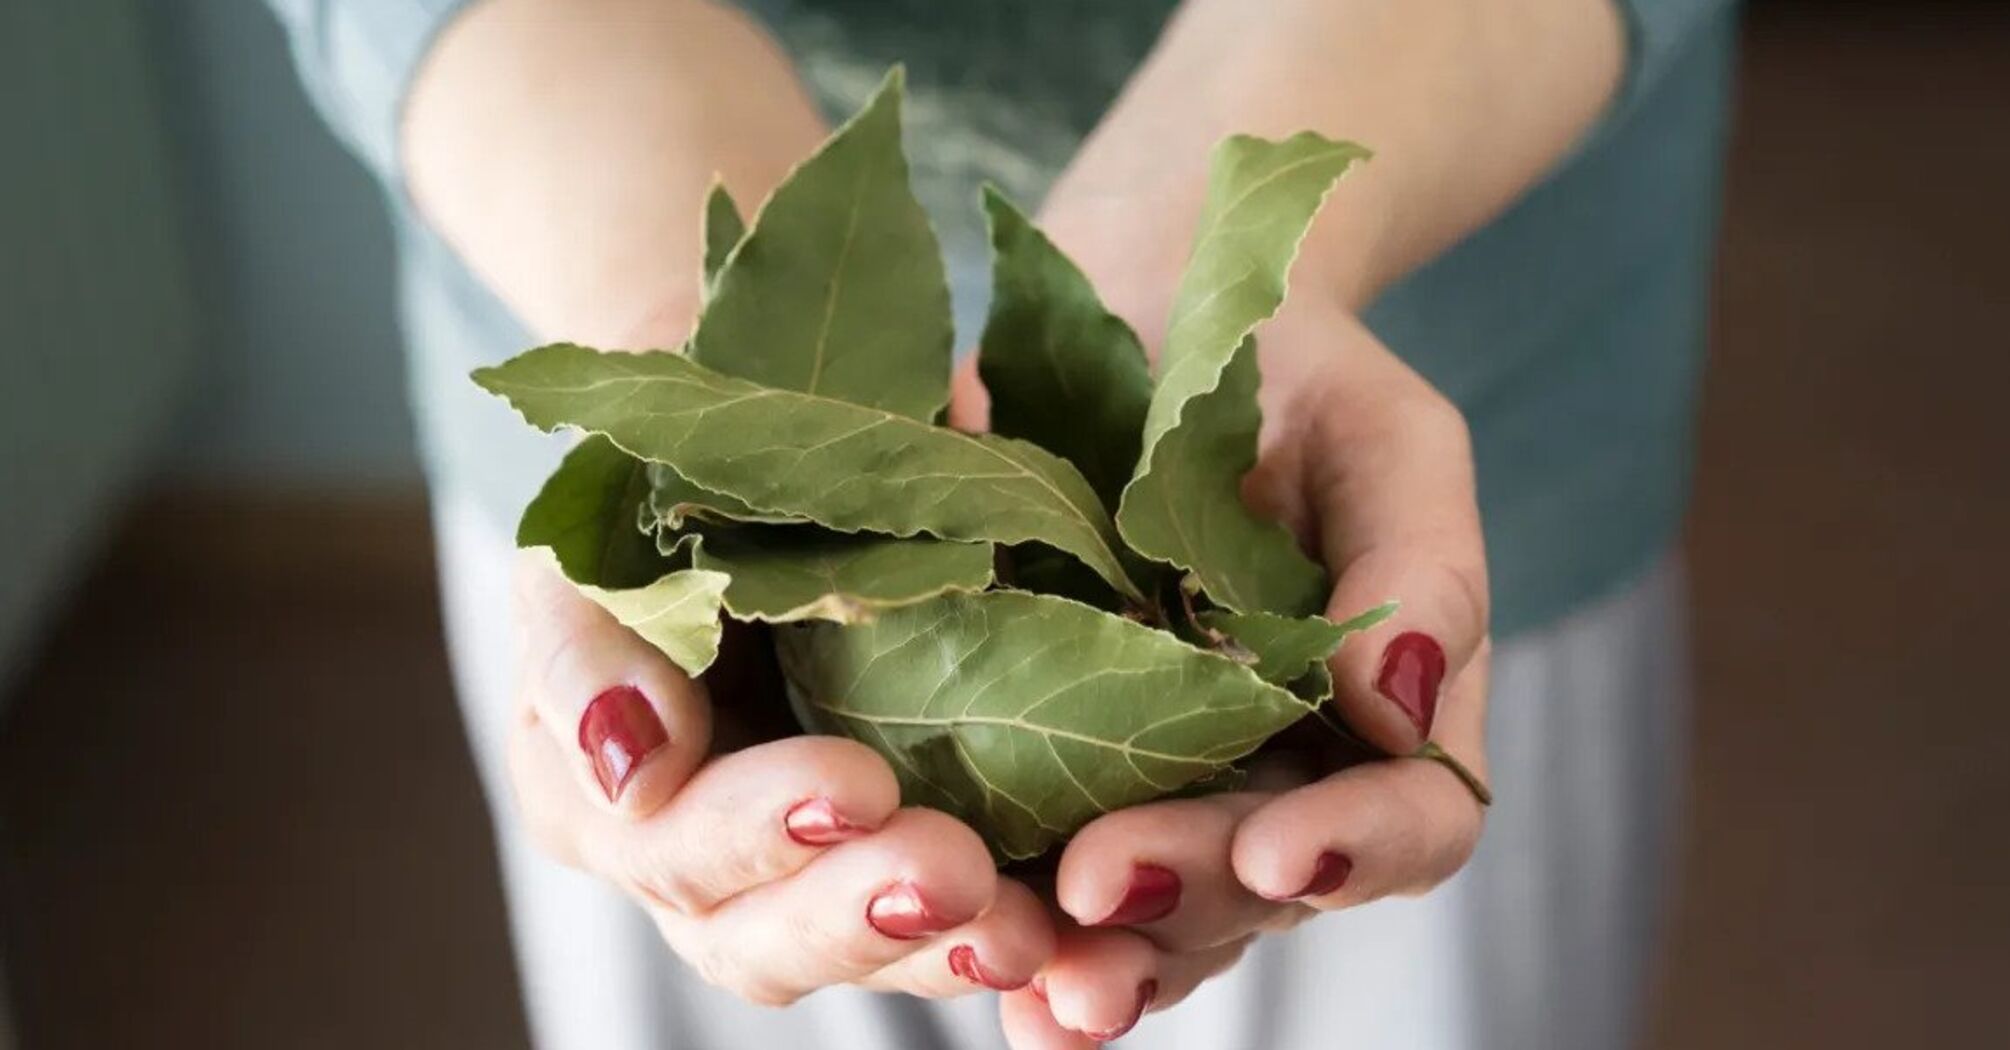 Spread bay leaves at home